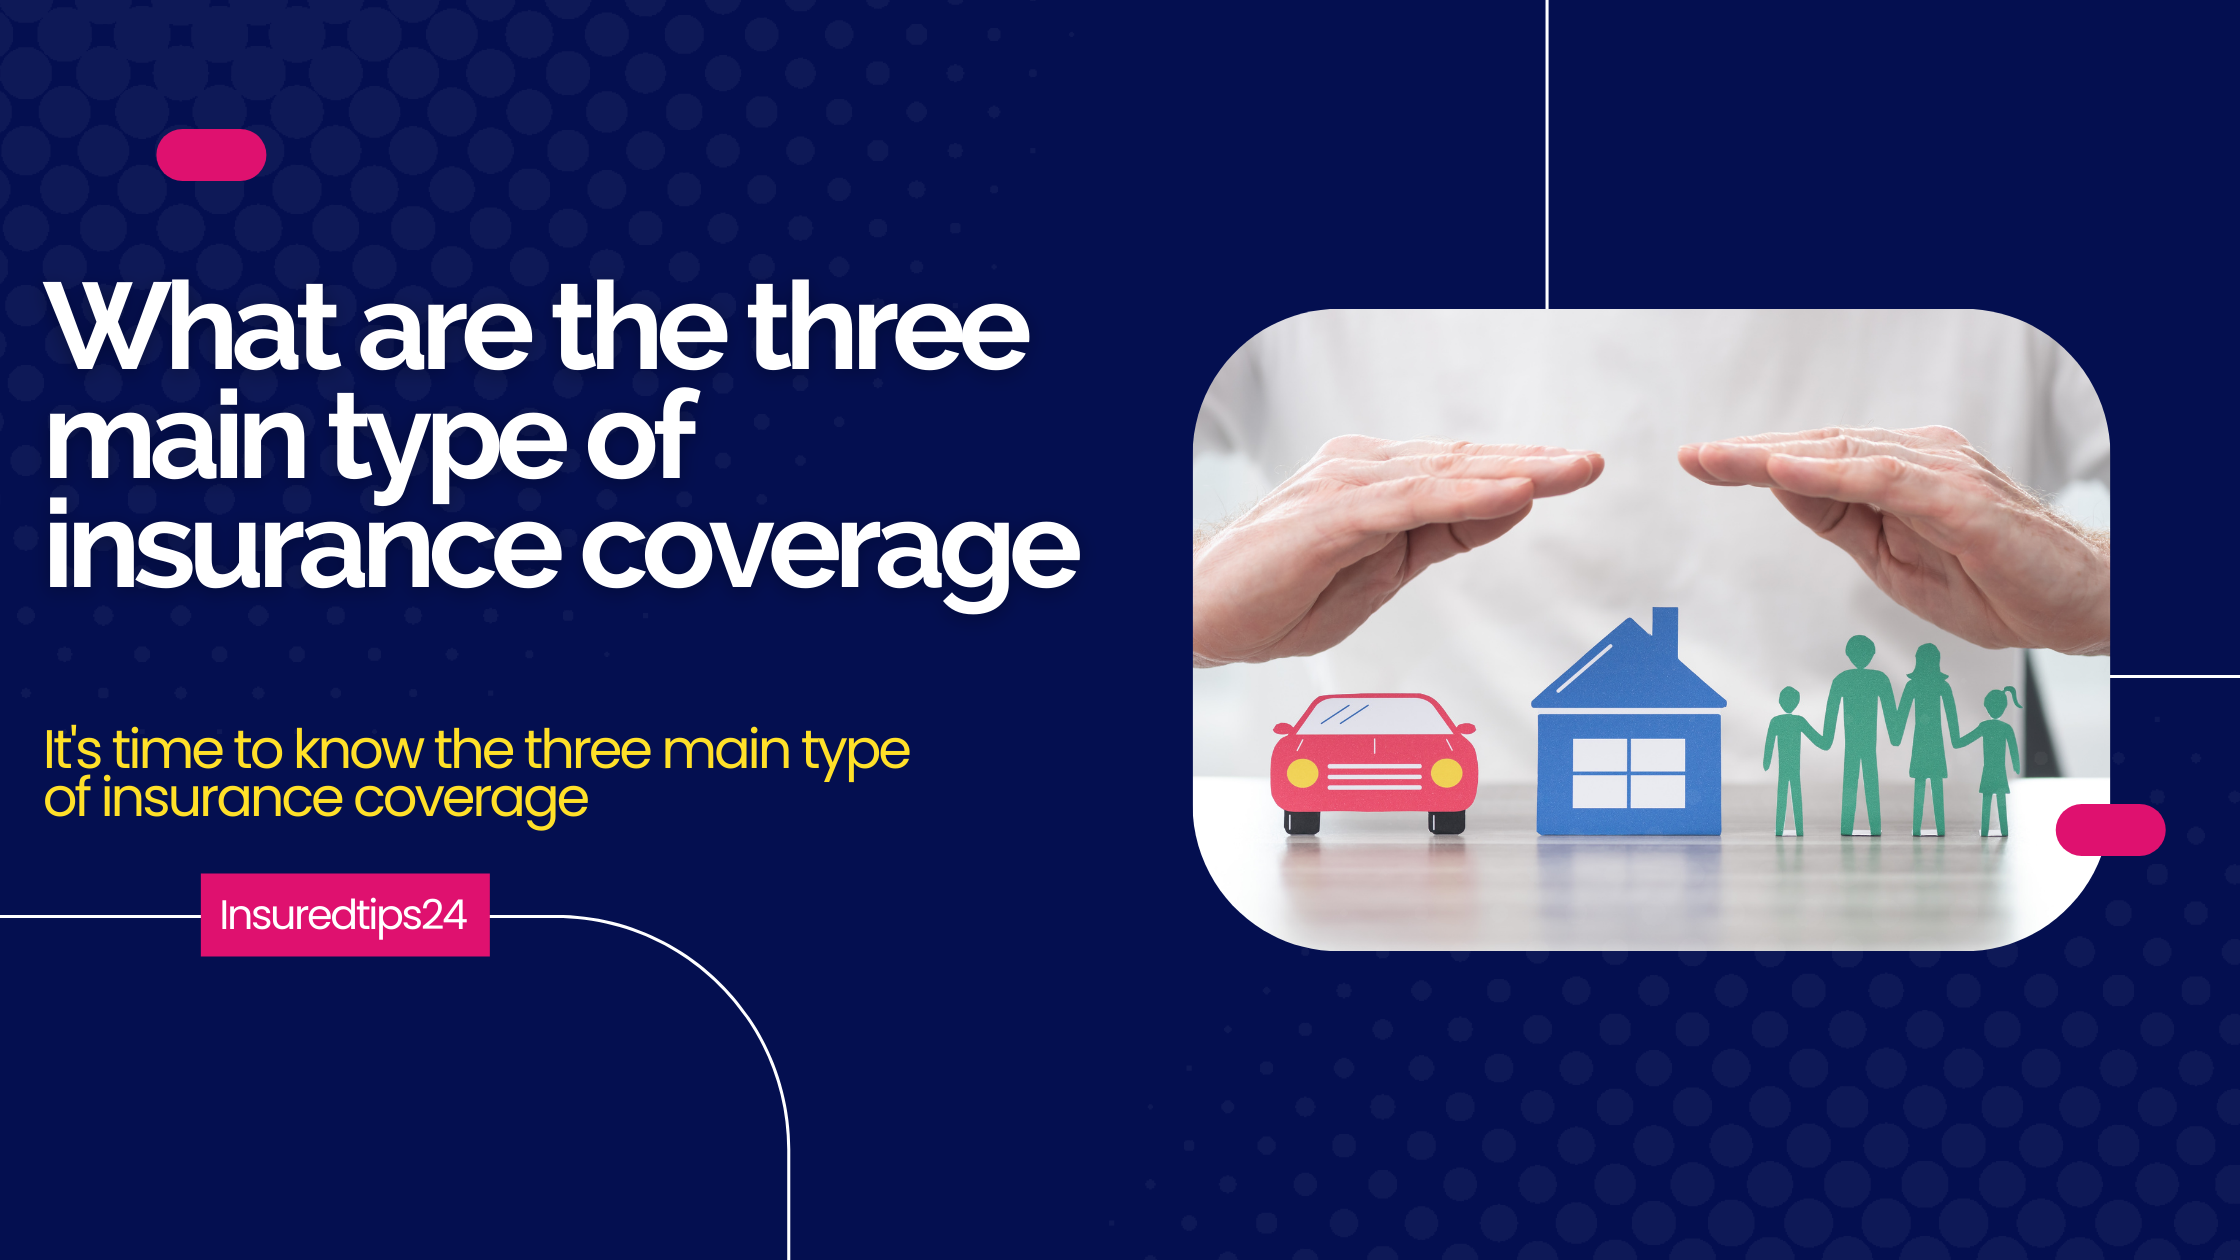 What are the three main type of insurance coverage?